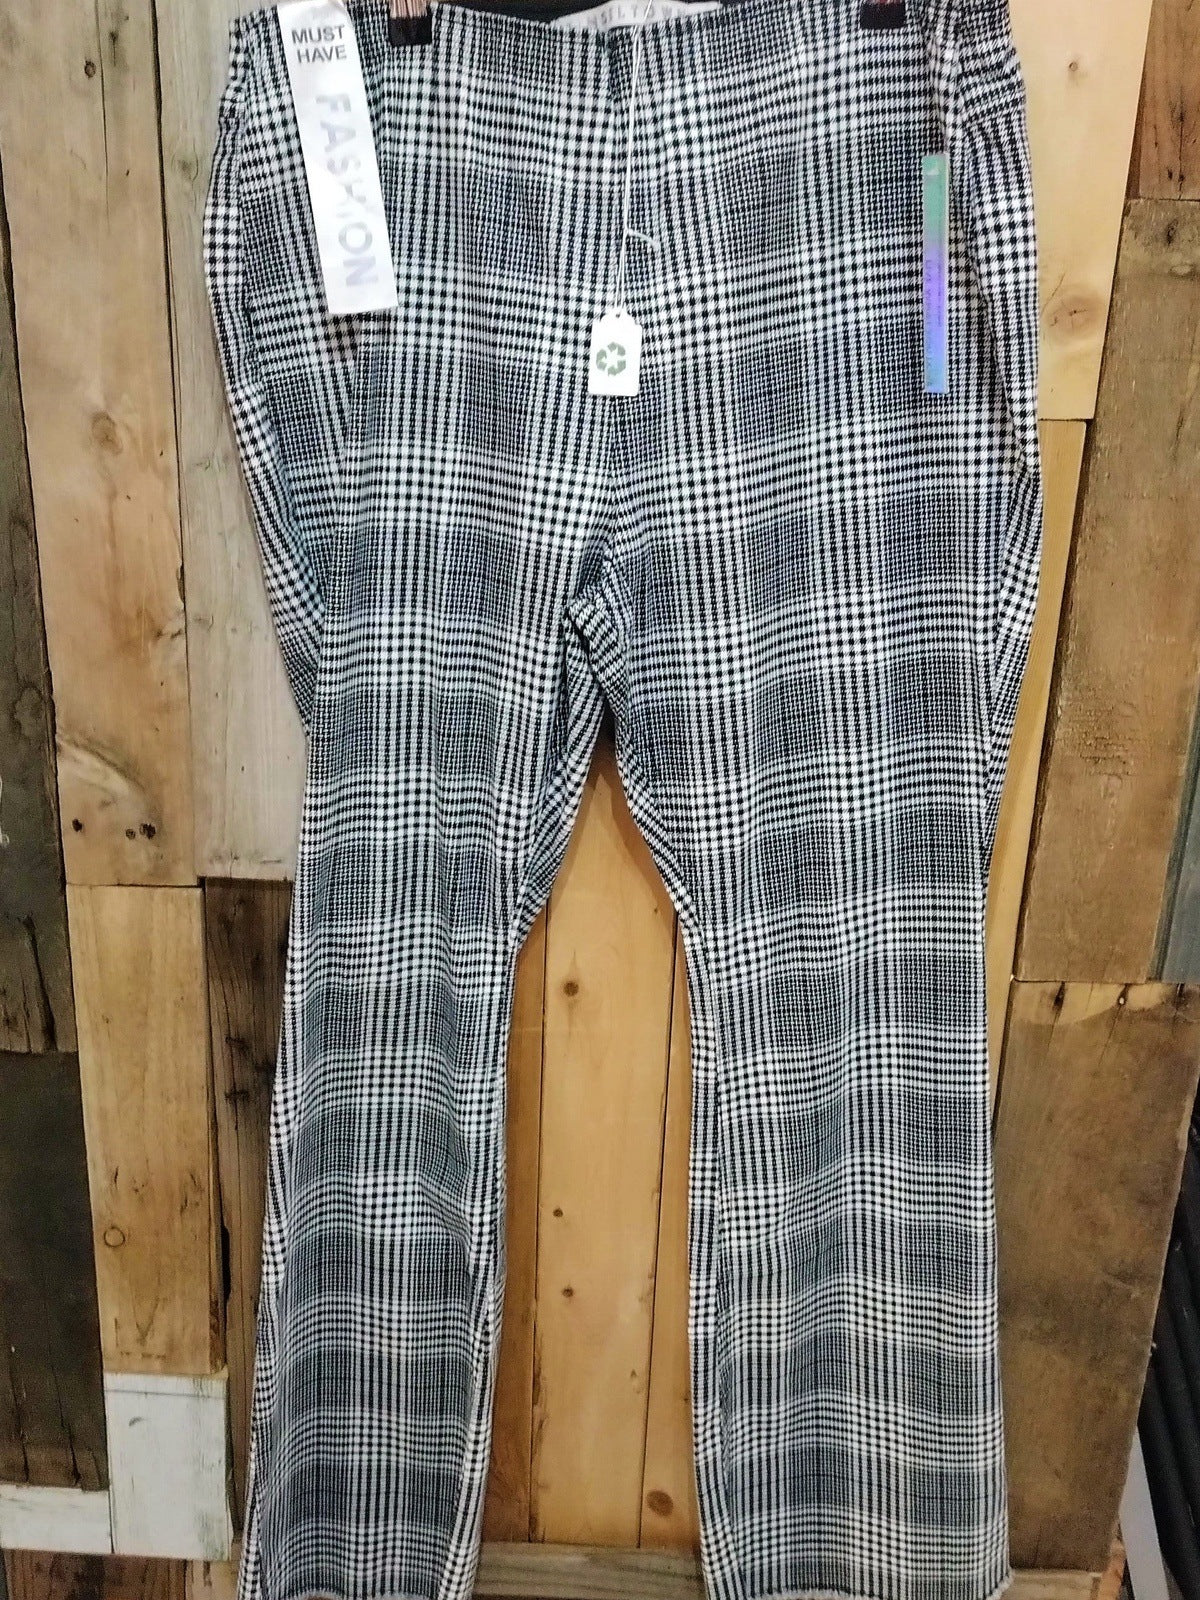 Tinseltown Women's Plaid Pants Size 16W New with Tags